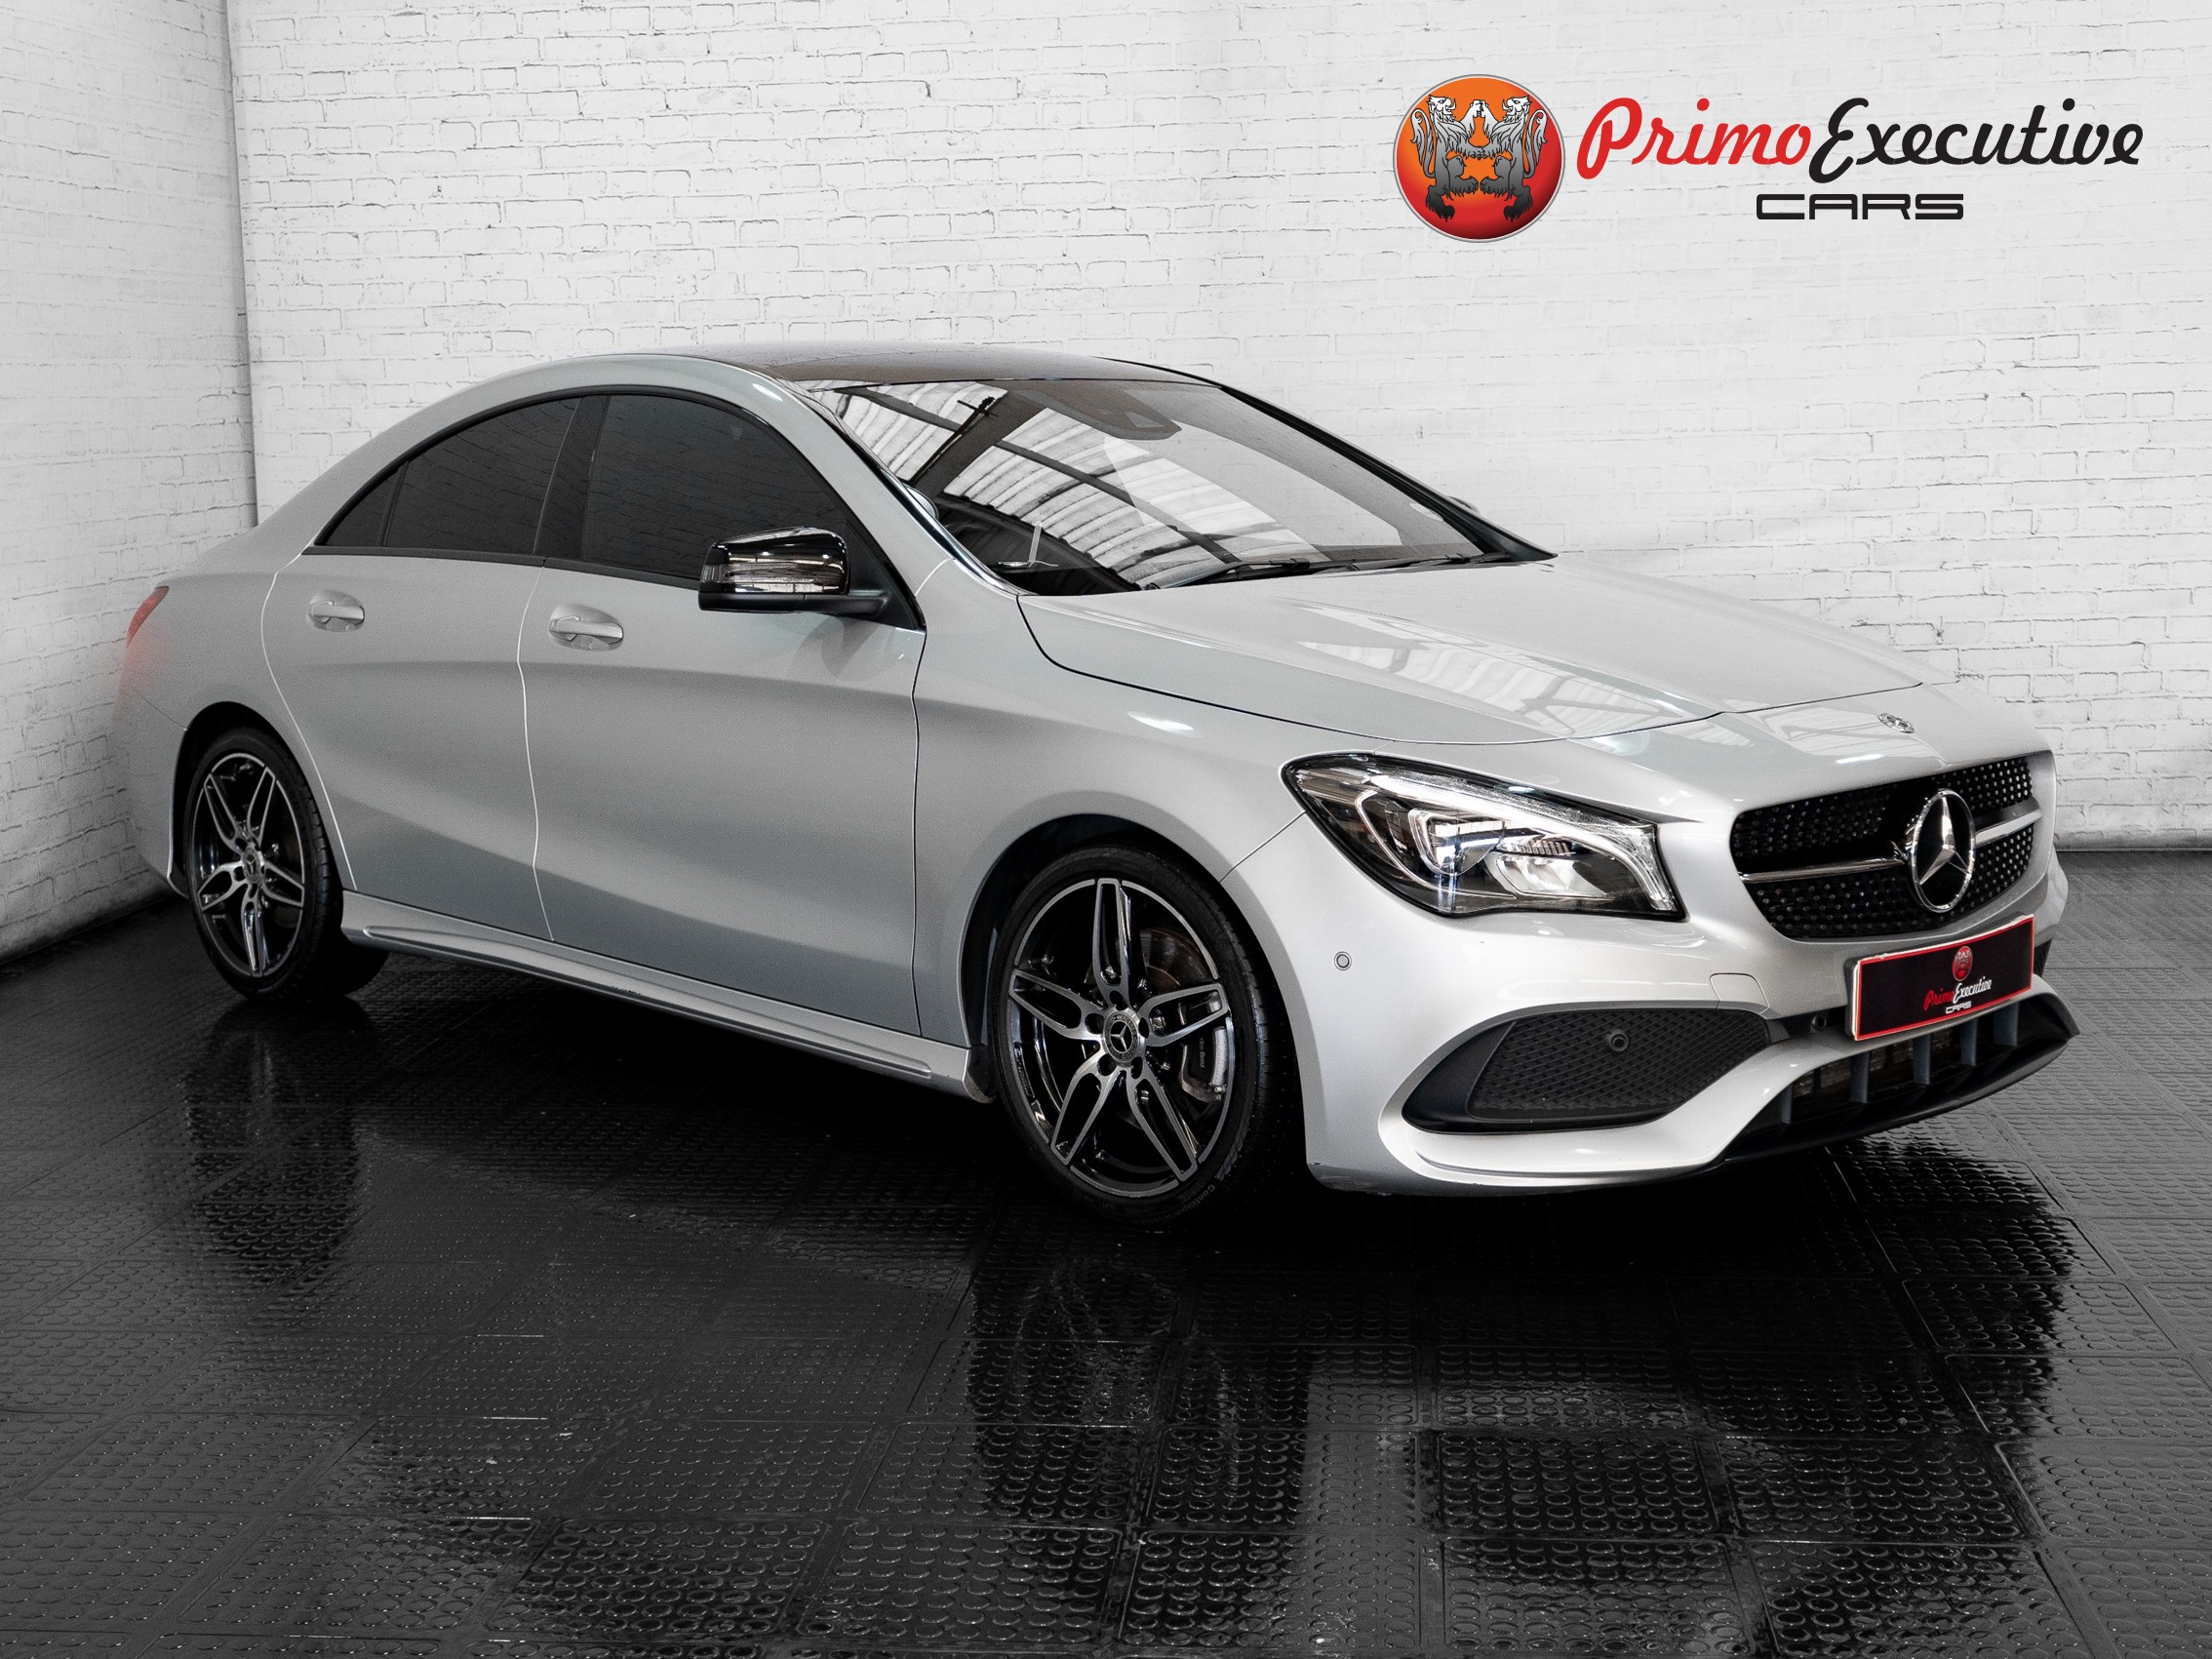 2017 Mercedes-Benz CLA  for sale - 510557